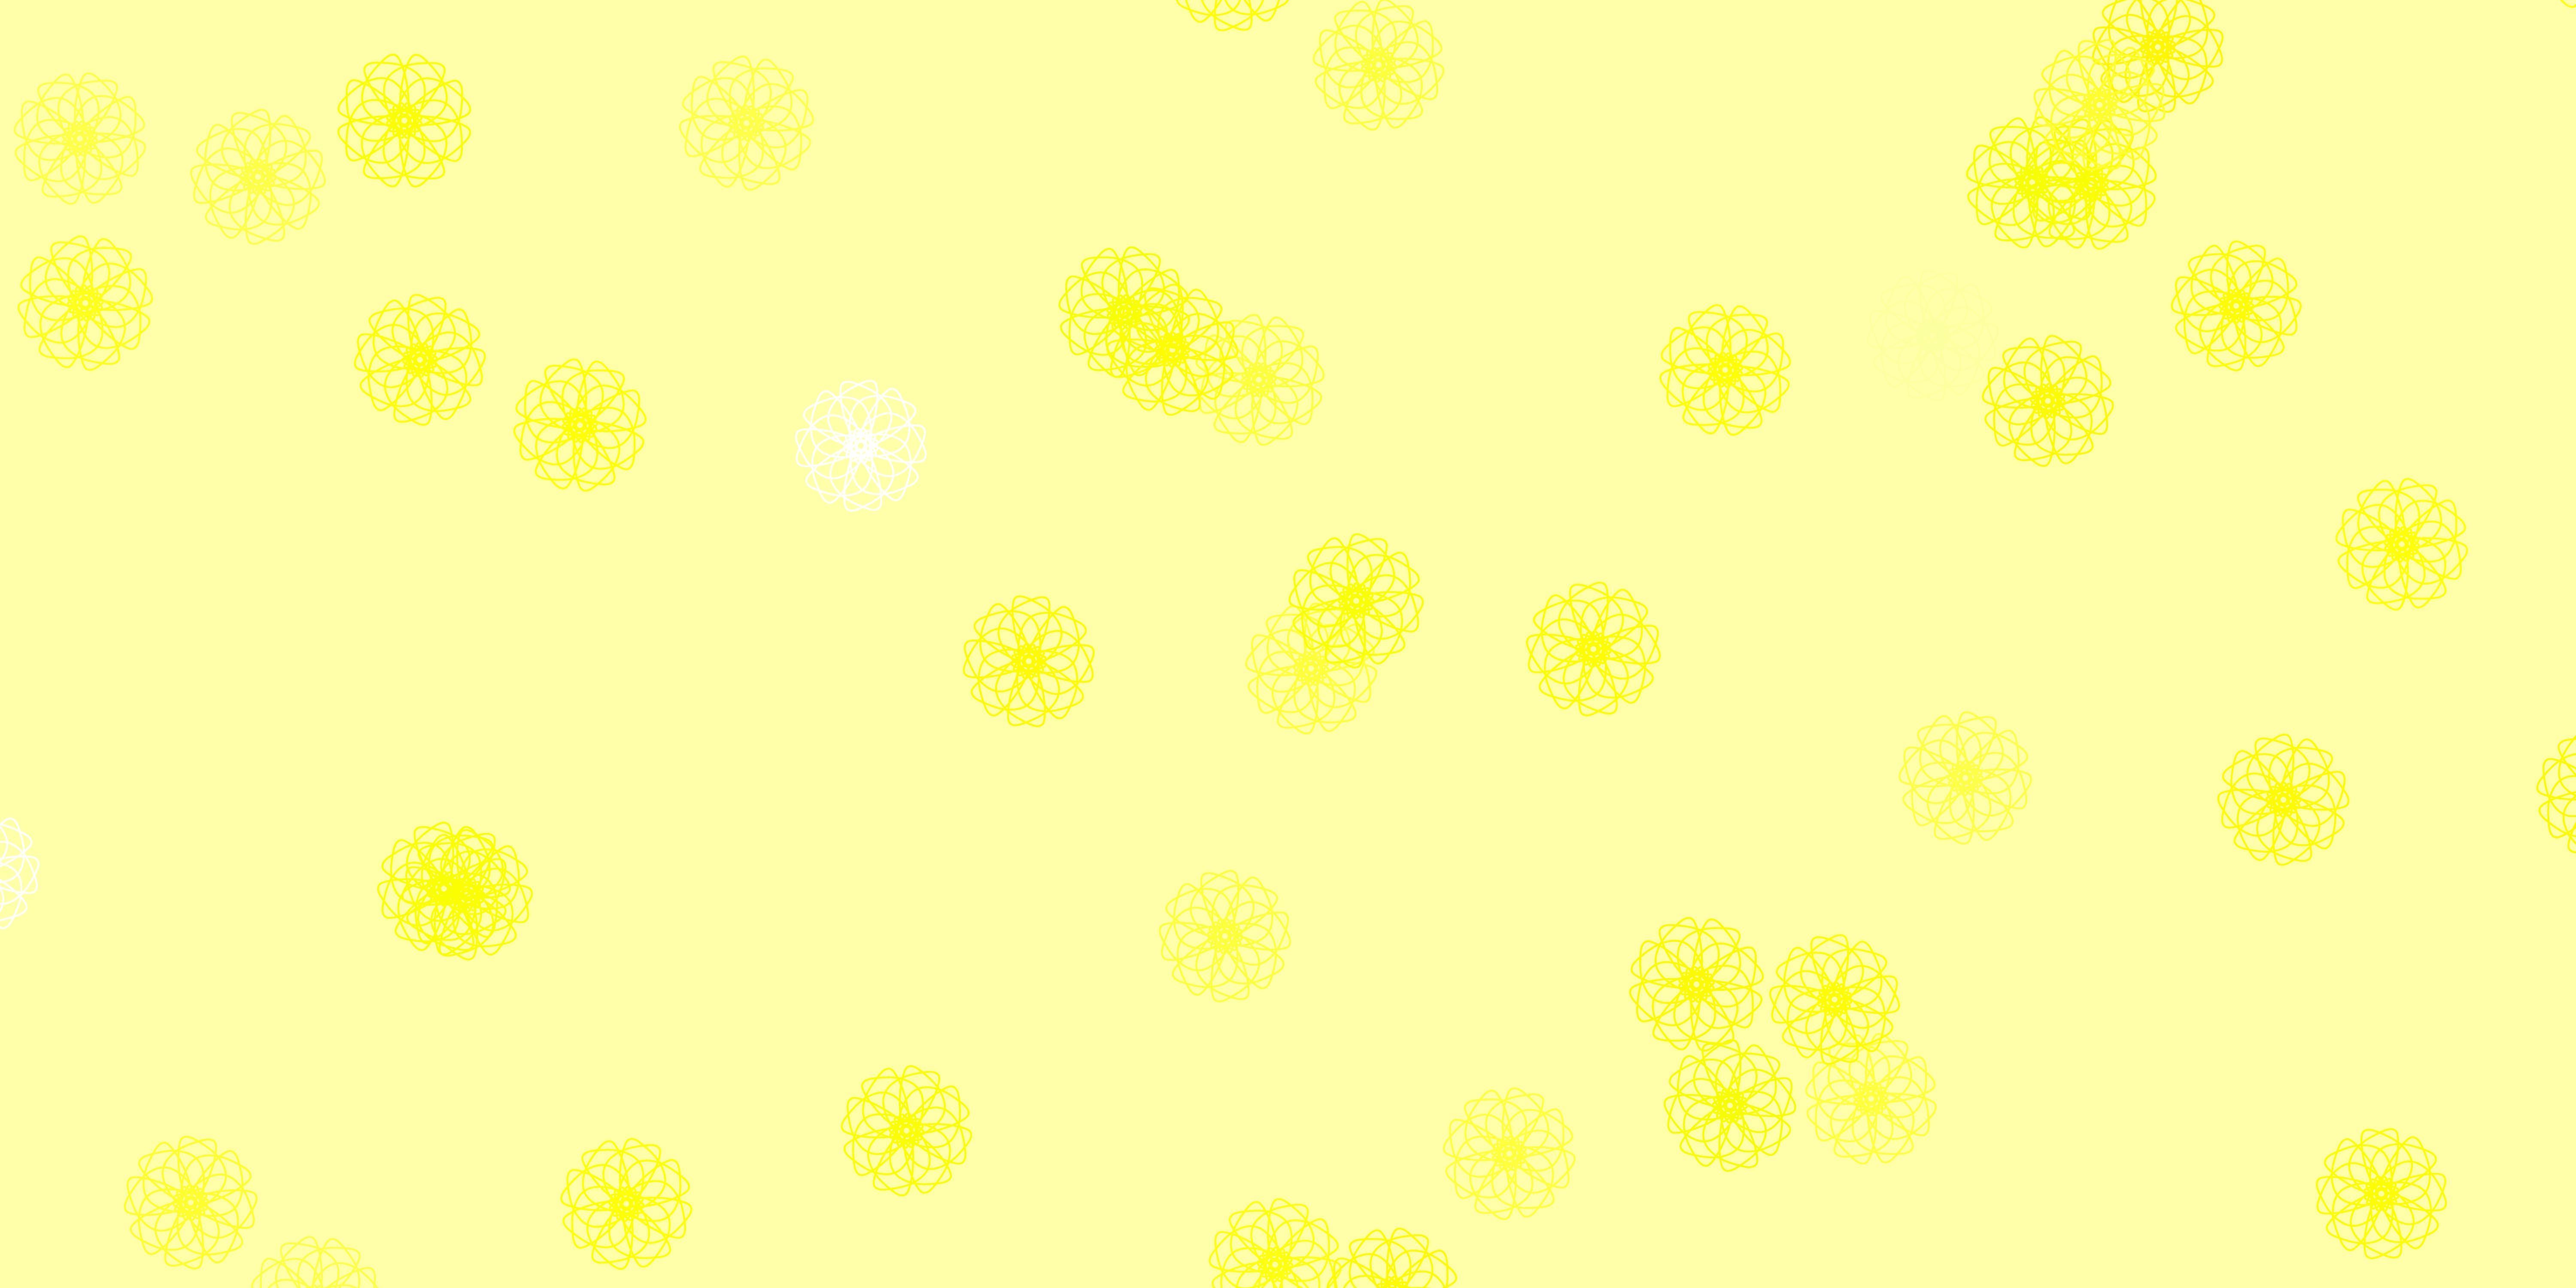 A yellow background with many small circles - Light yellow